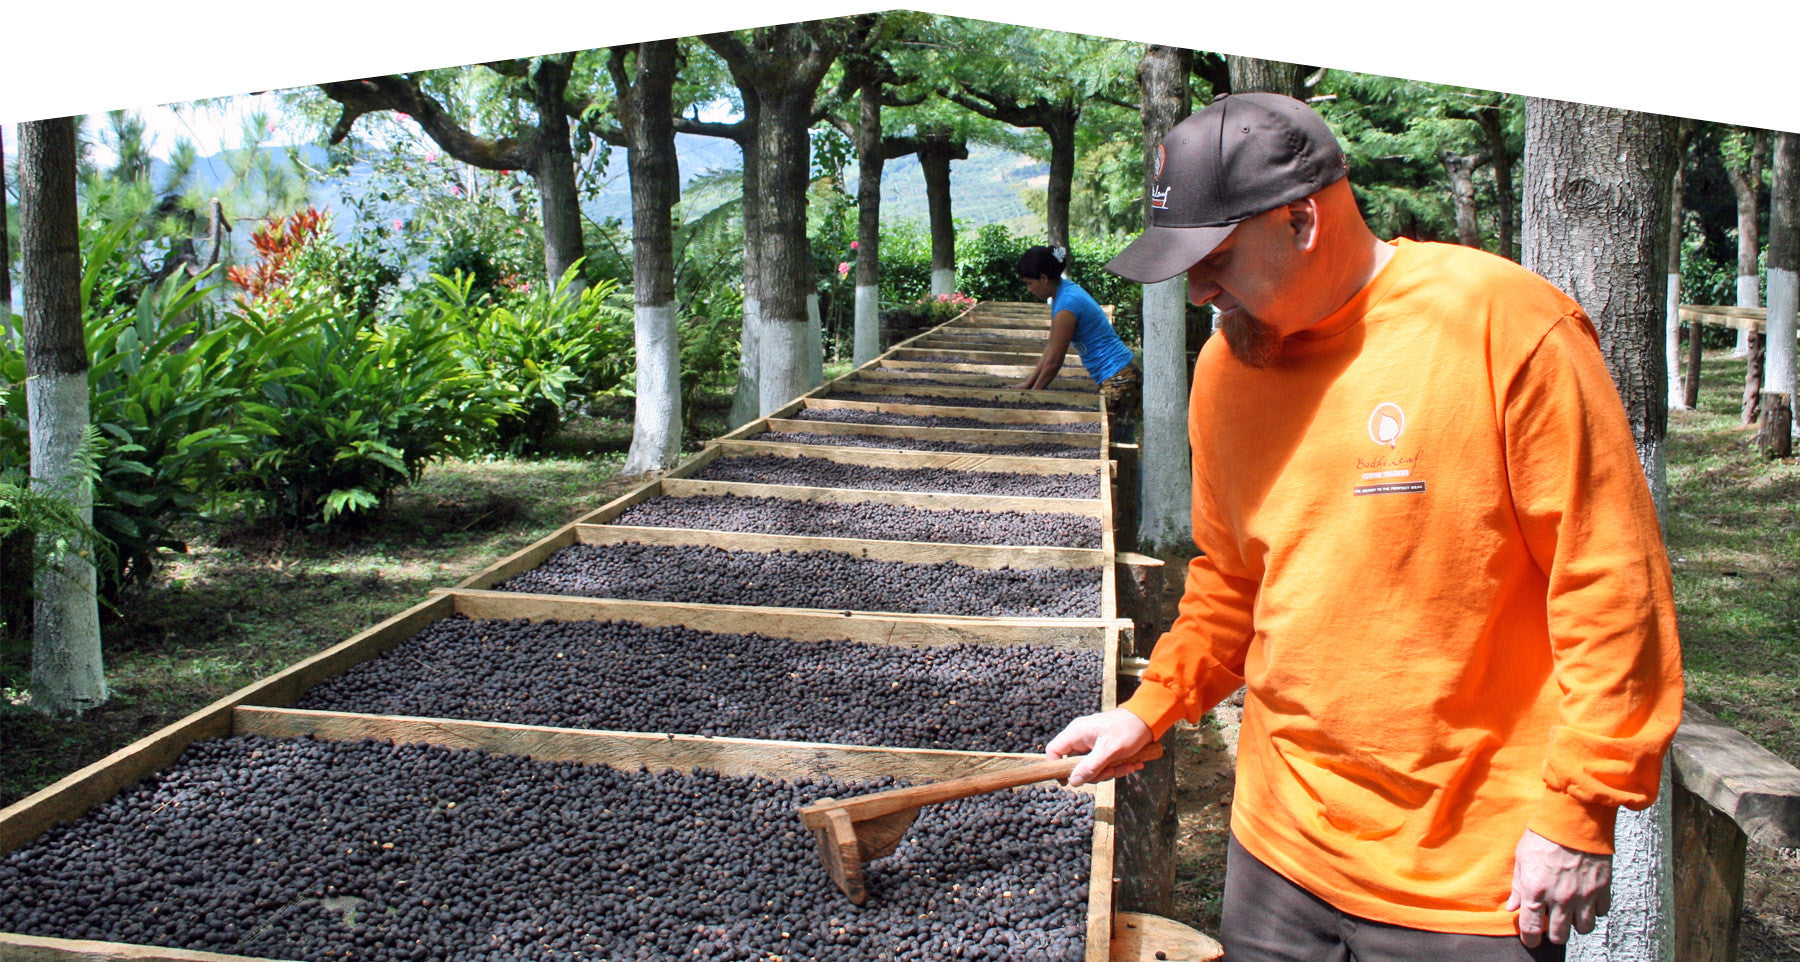 Steve Sims at coffee farm drying bed